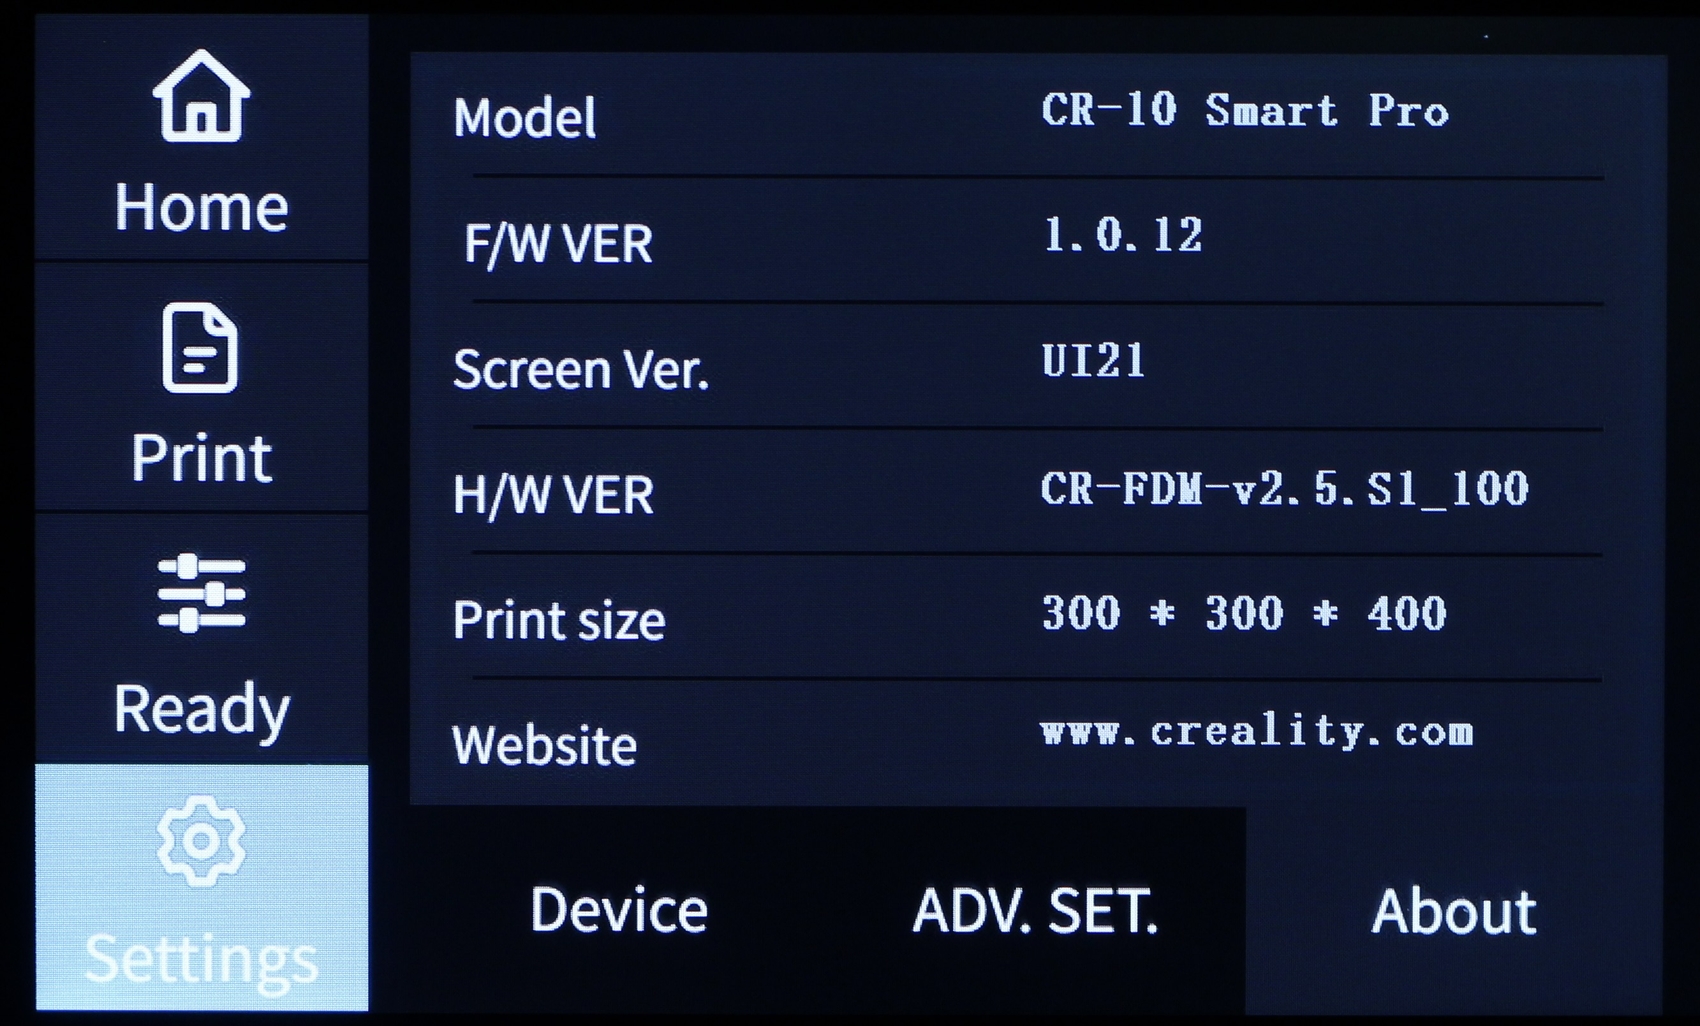 CR 10 Smart Pro Touchscreen Interface8 | Creality CR-10 Smart Pro Review: Capable but Pricey